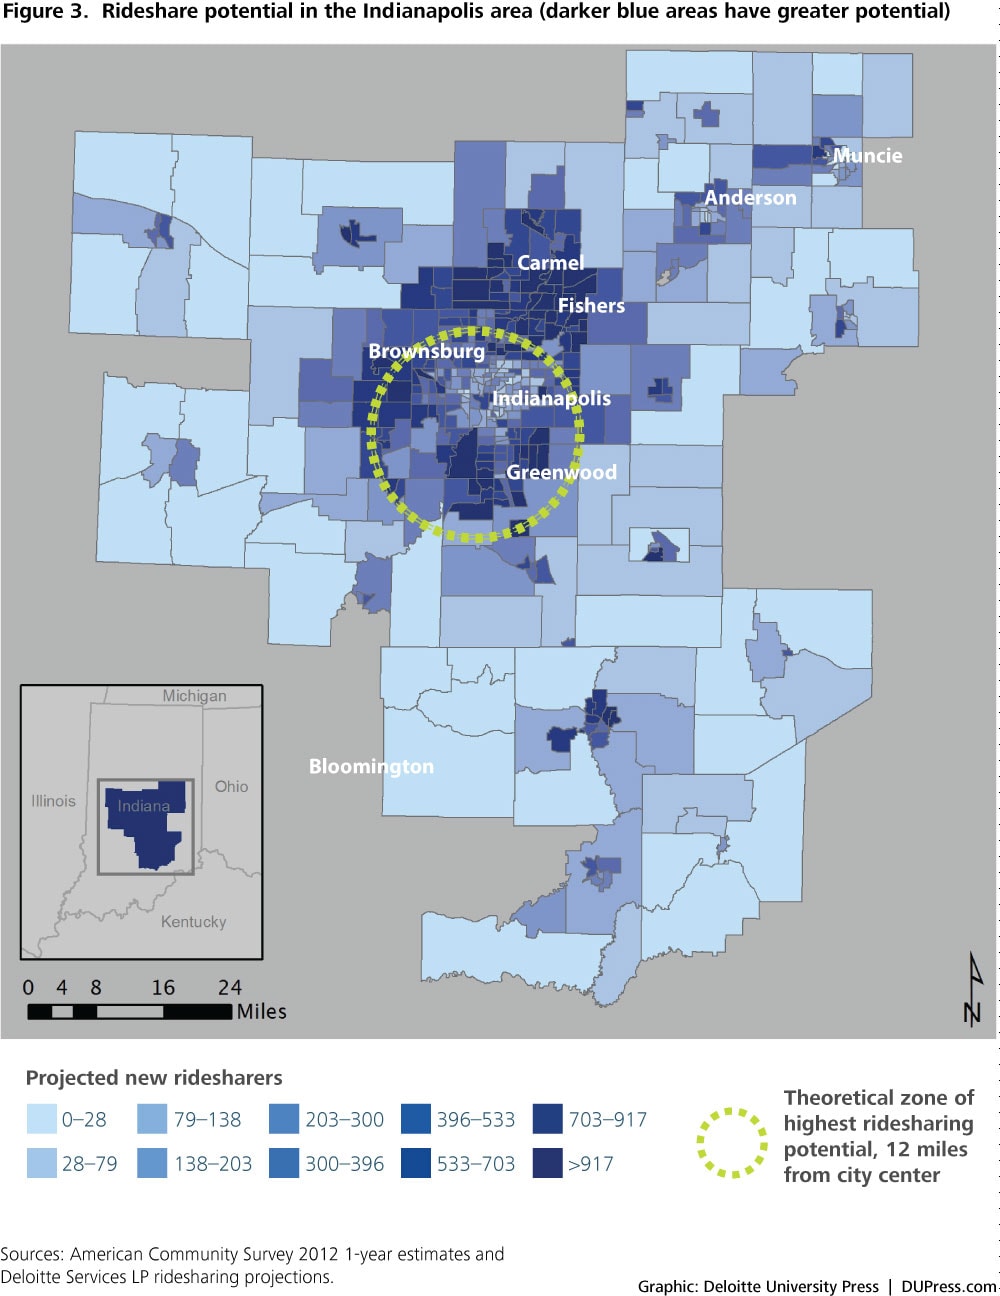 DUP_1027_Figure 3: Rideshare potential in the Indianapolis area